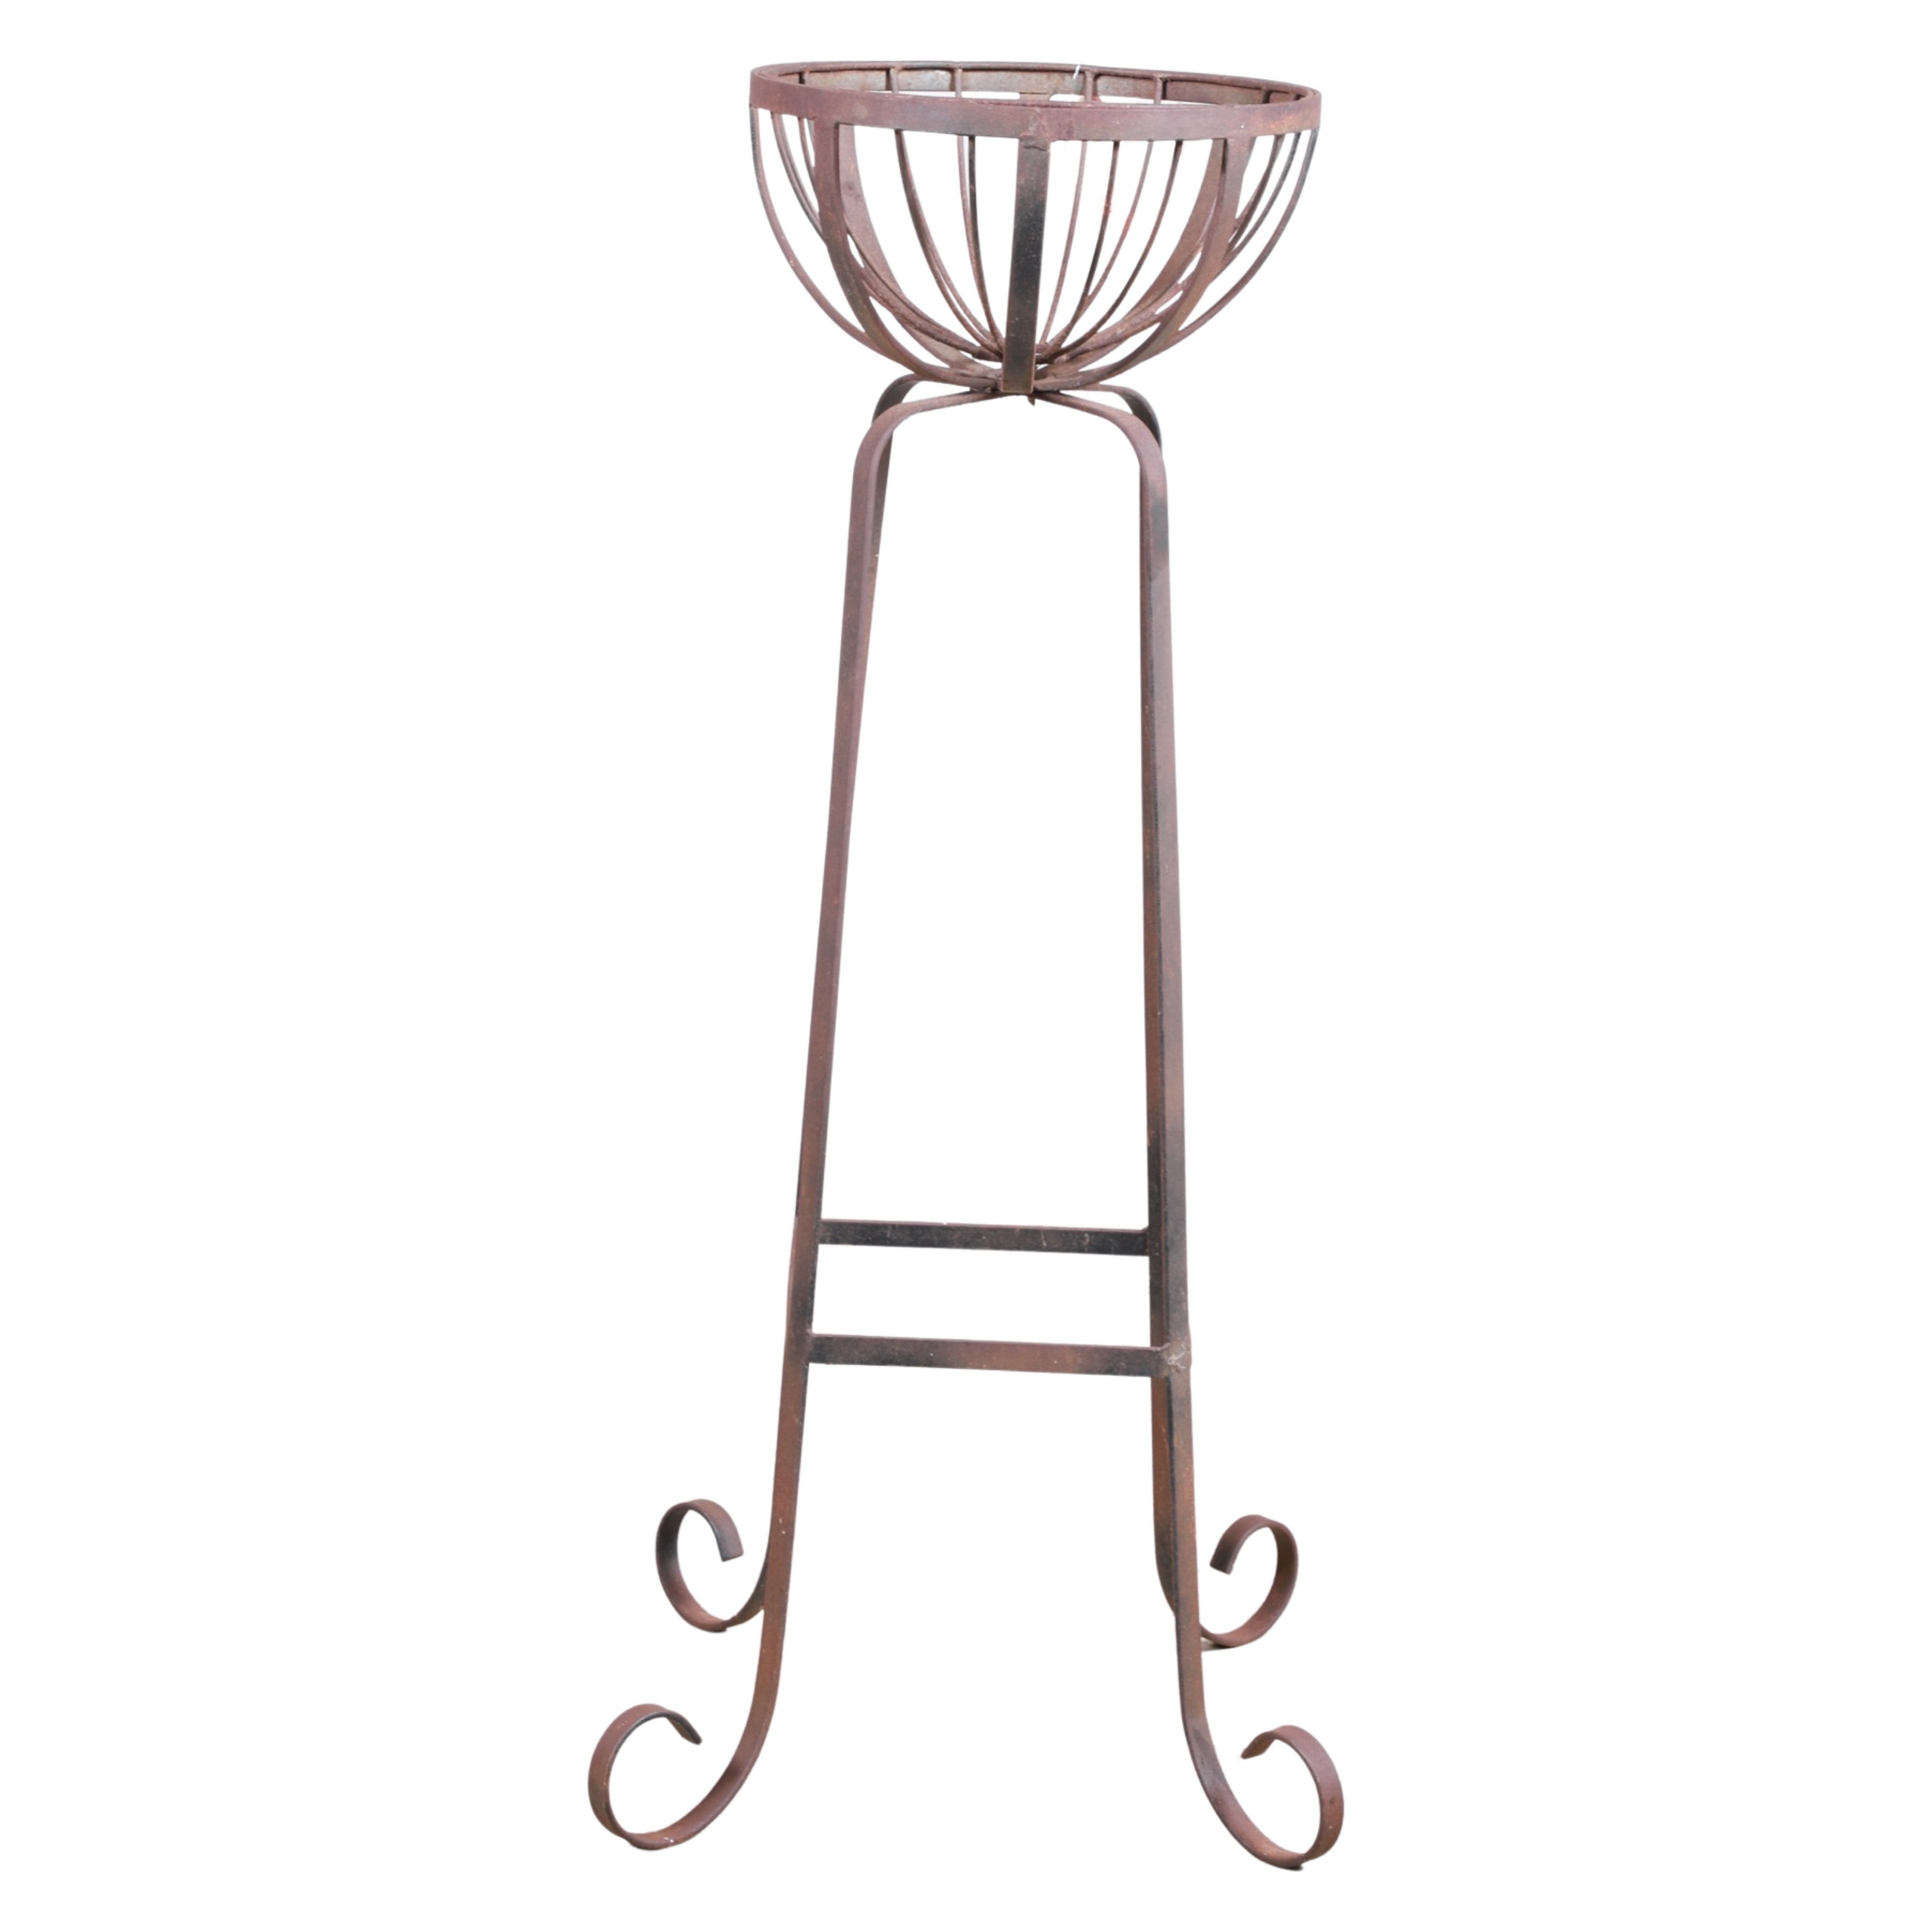 Iron standing plant stand, scrolled